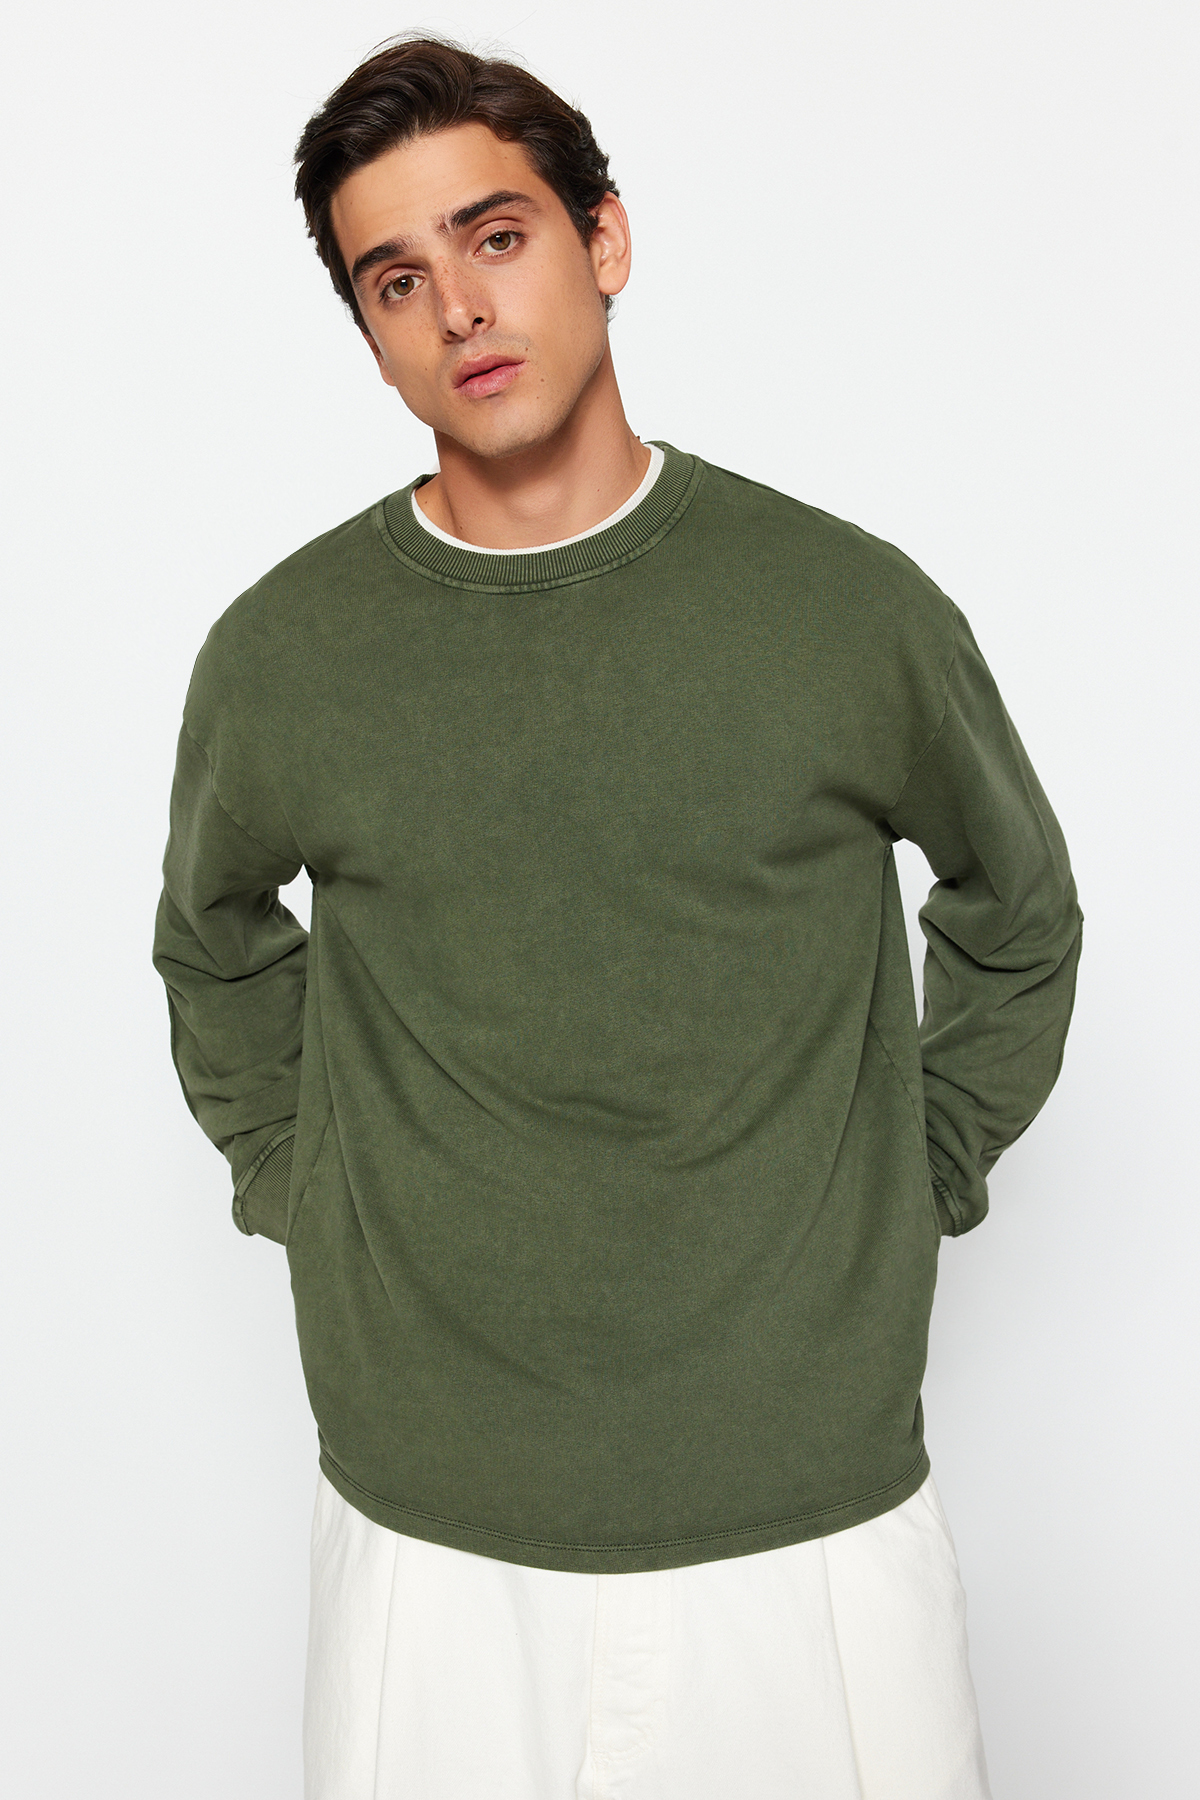 Trendyol Limited Edition Men's Relaxed/Comfortable fit, age-worn/faded effect 100% Cotton with Labels Thick Sweatshirt.